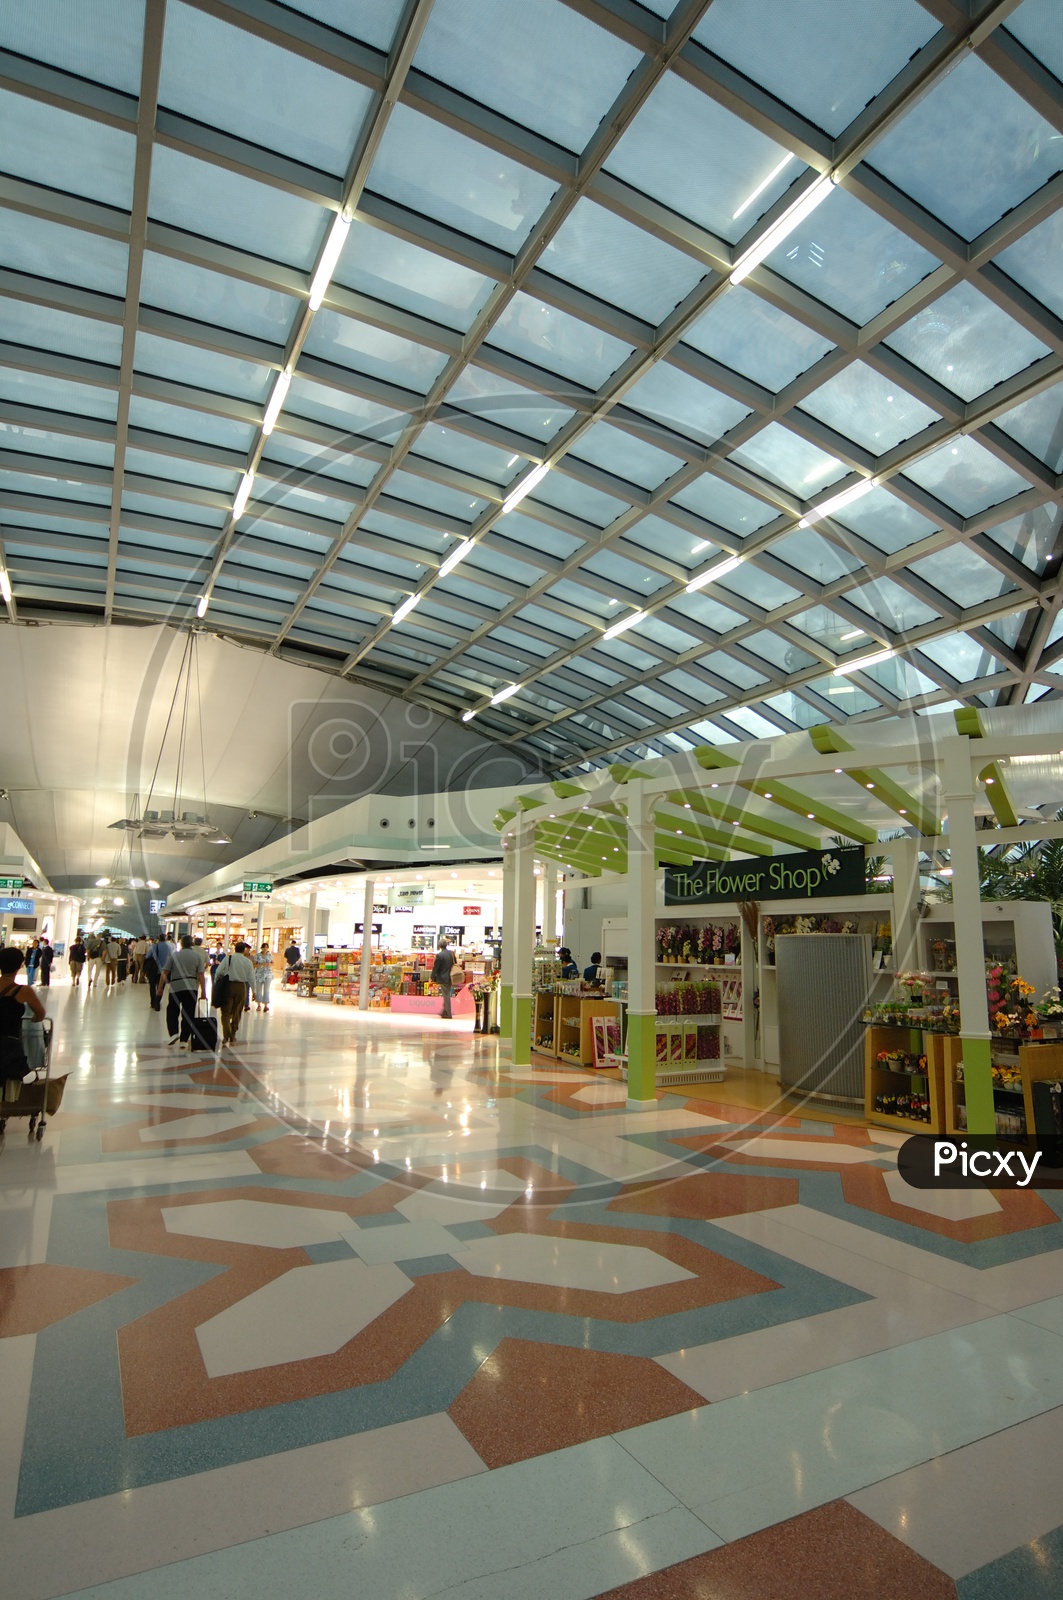 Krabi Airport With Travel Scenes Of Passengers and Vendor Shops